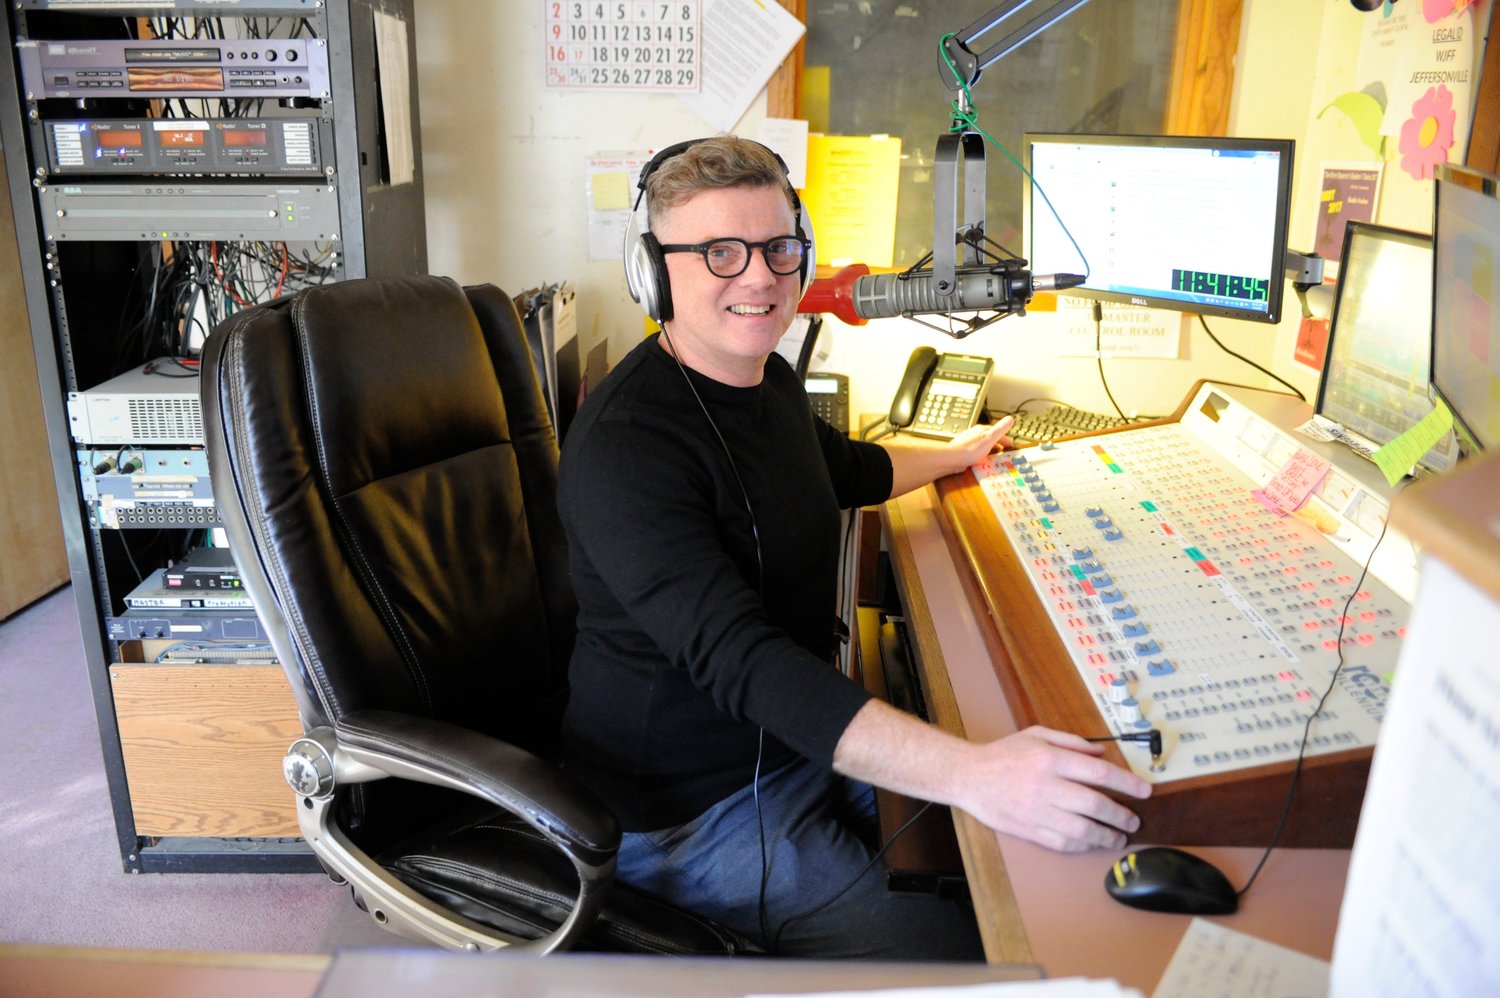 Switching from analog to digital, and no more mice. WJFF’s general manager Tin Bruno takes a turn on the board in the station’s outdated broadcast studio, a place where mice once chewed through some wiring.